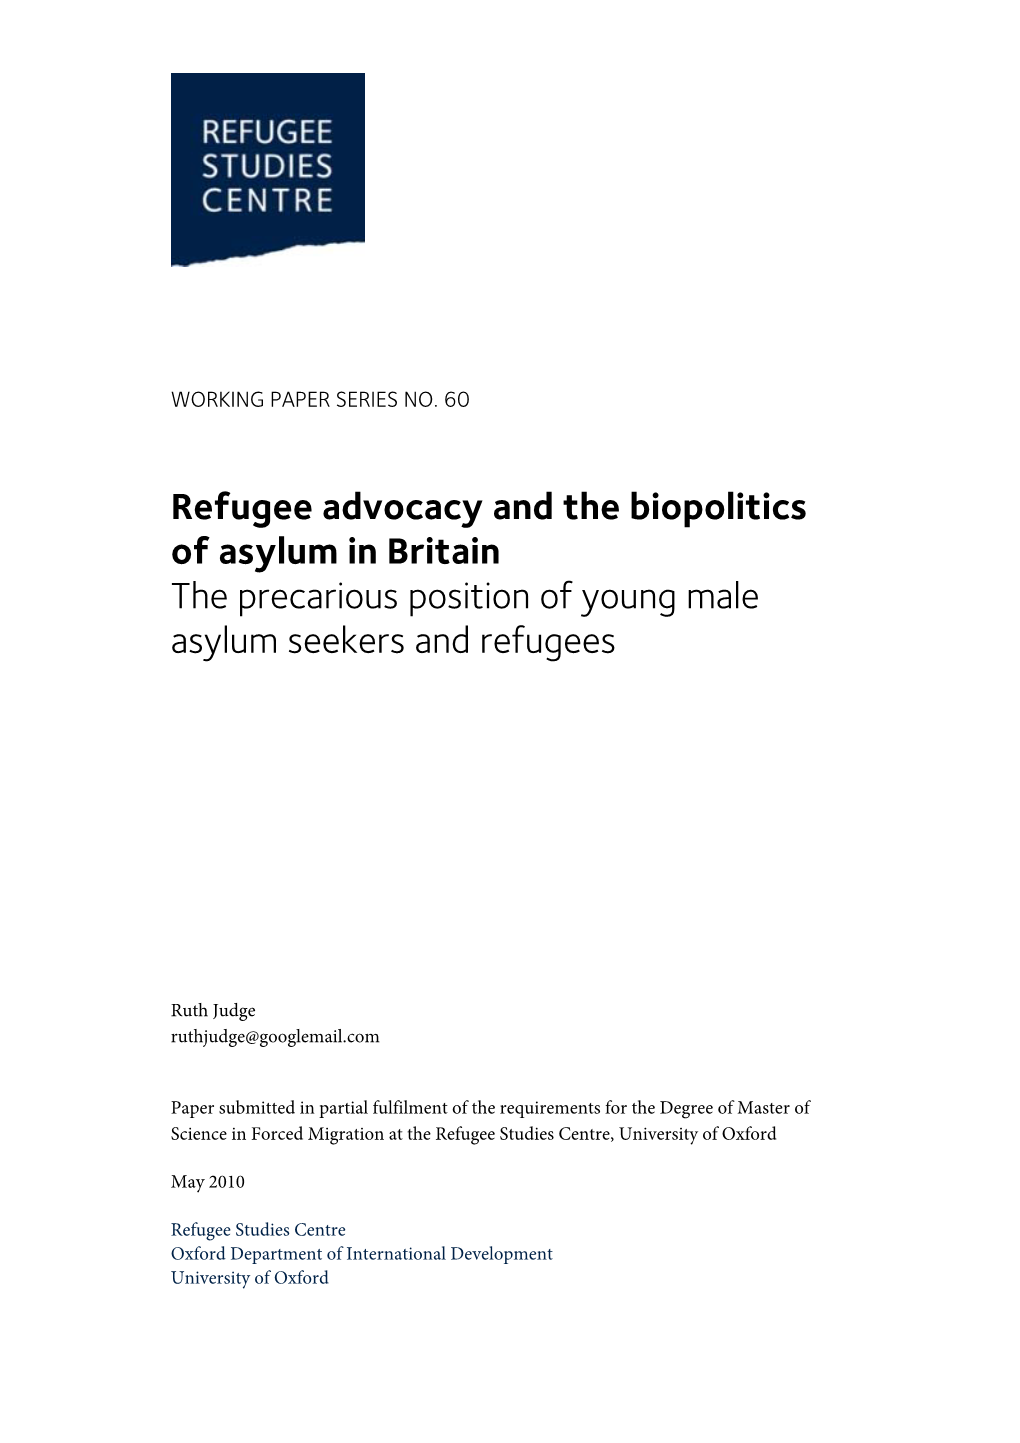 Refugee Advocacy and the Biopolitics of Asylum in Britain the Precarious Position of Young Male Asylum Seekers and Refugees